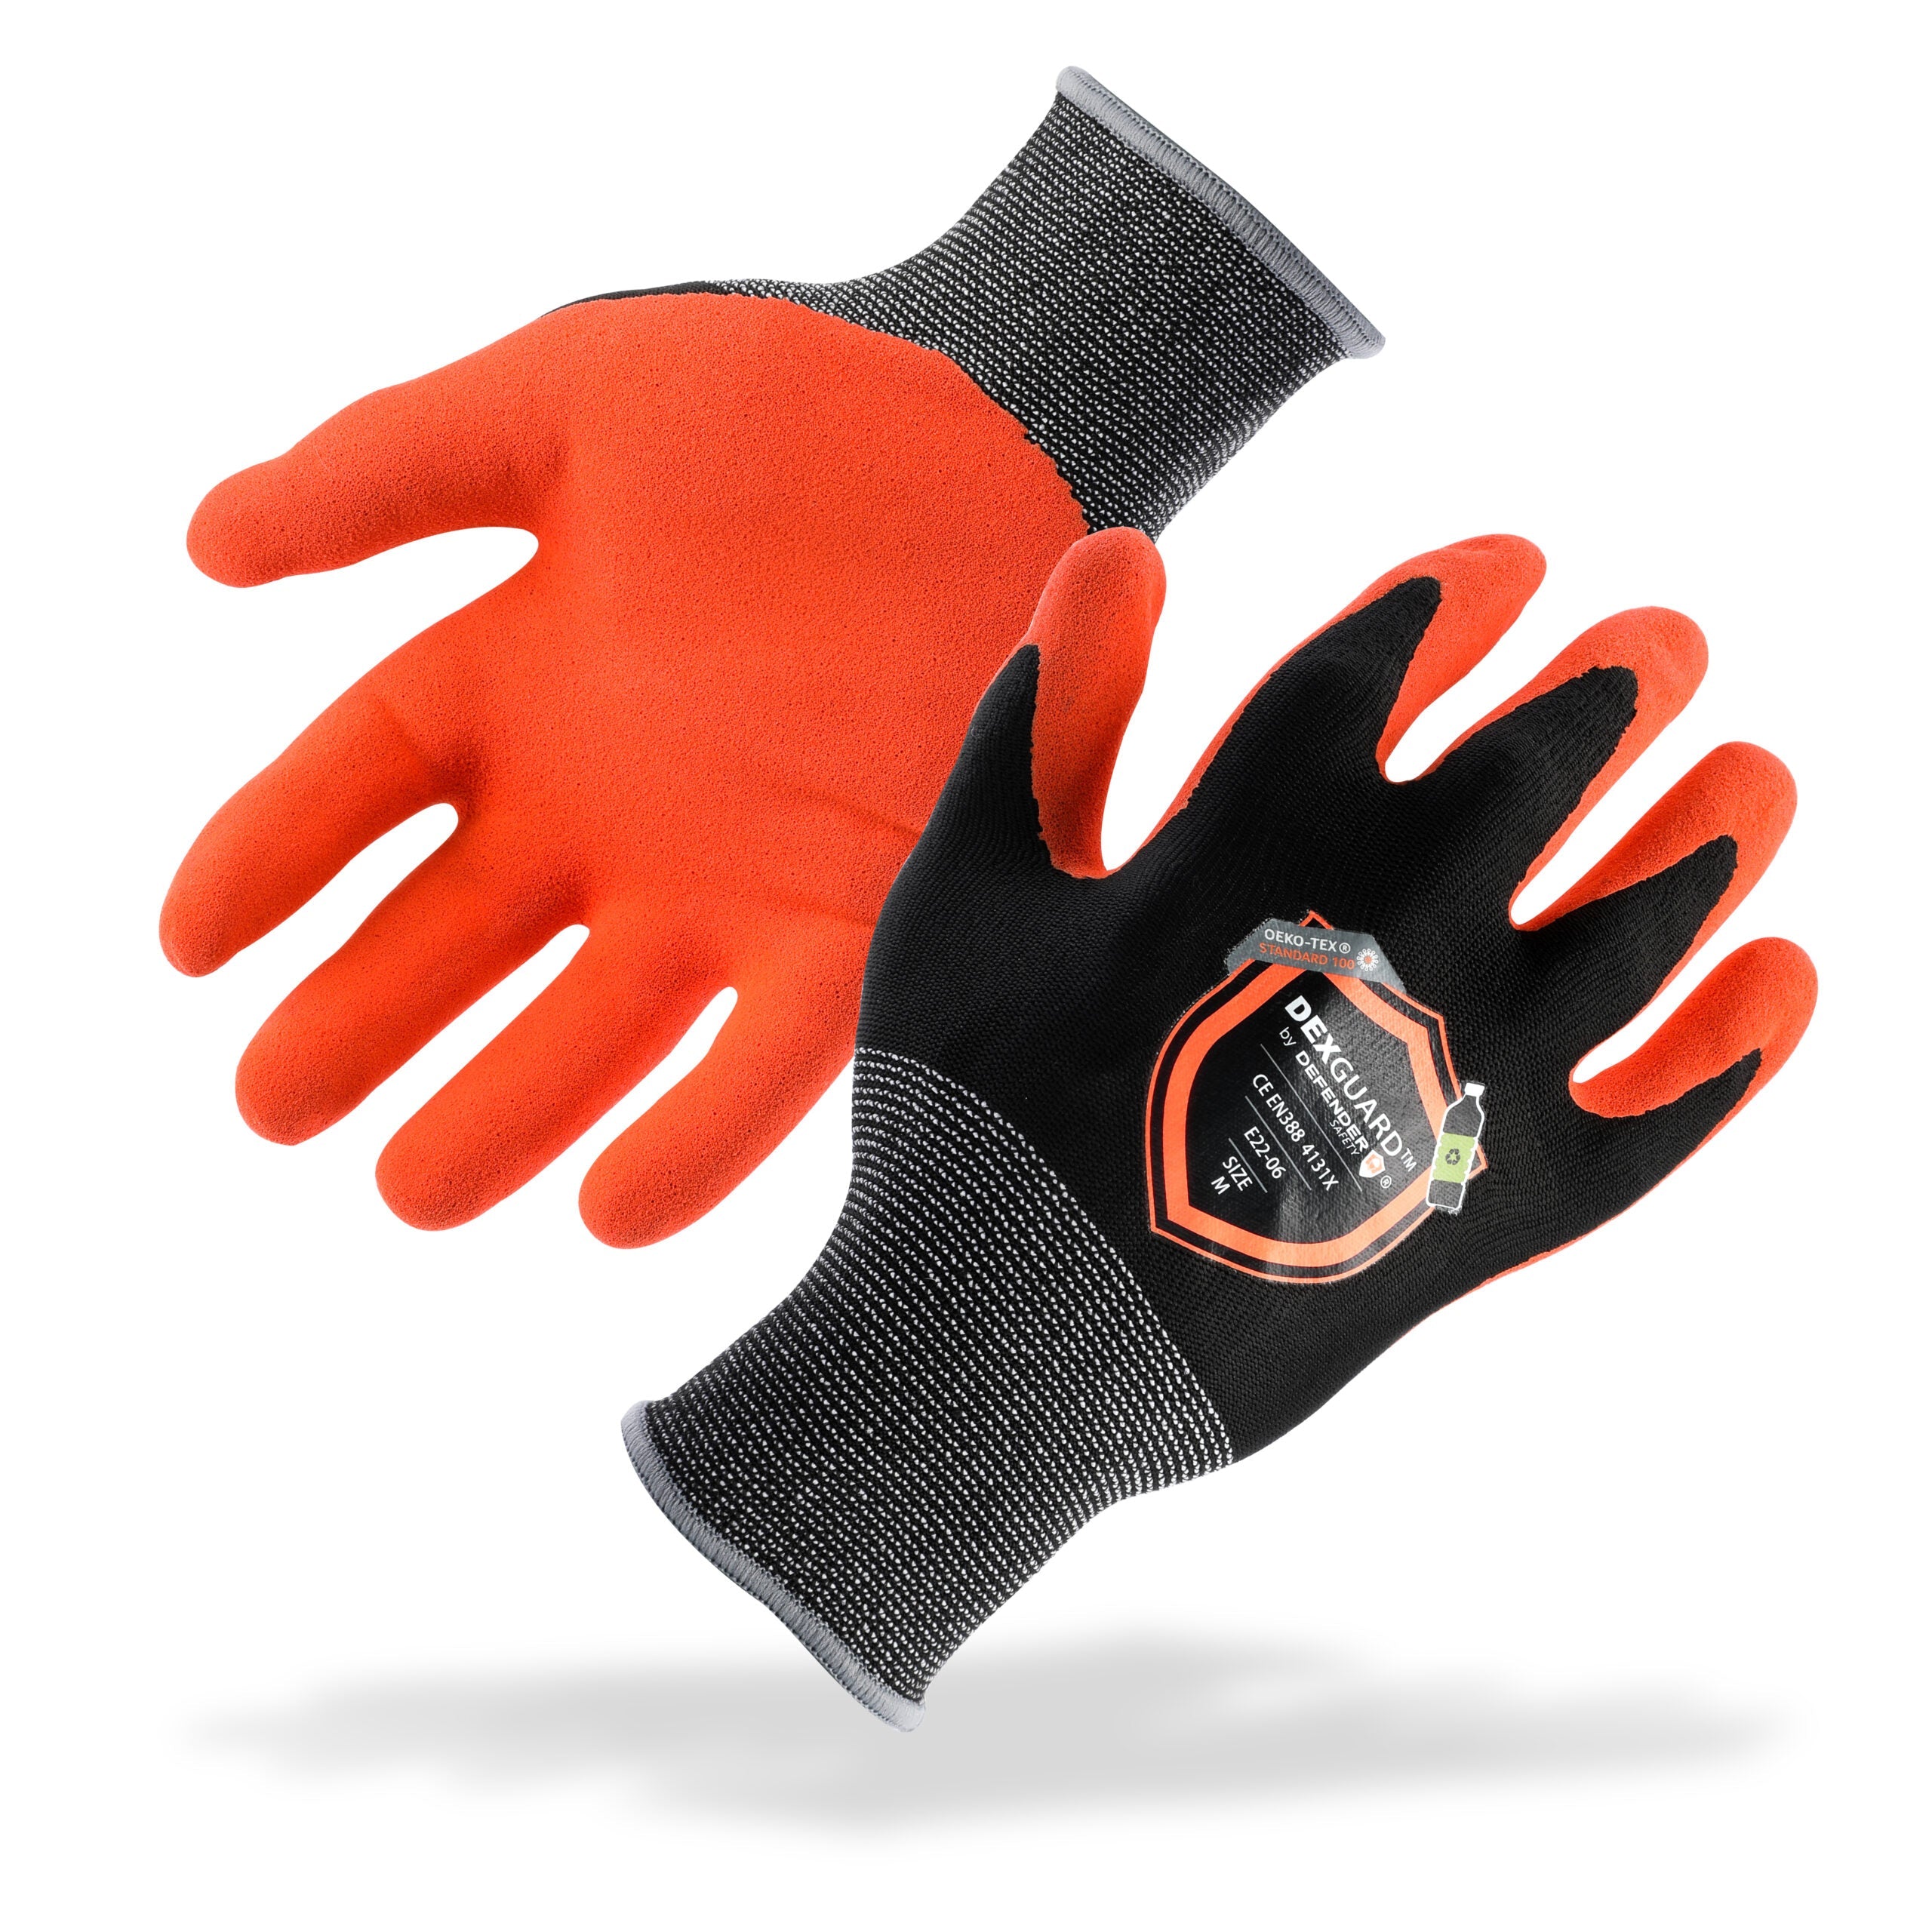 https://defendersafety.com/cdn/shop/products/dexguard-general-purpose-recycled-gloves-touch-screen-compatible-abrasion-resistant-level-4-textured-nitrile-coating-471317.jpg?v=1690825176&width=2560